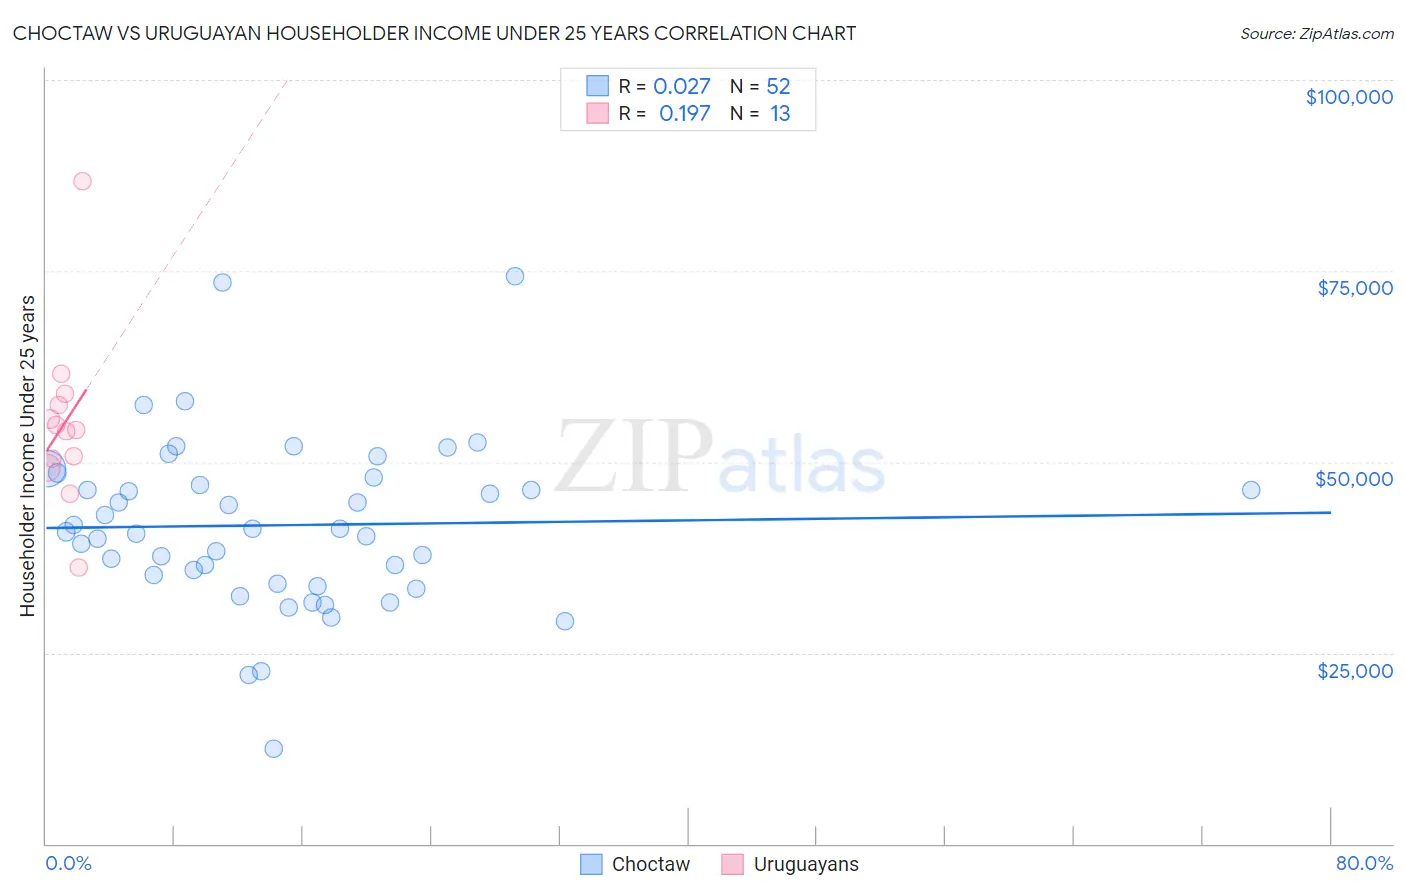 Choctaw vs Uruguayan Householder Income Under 25 years